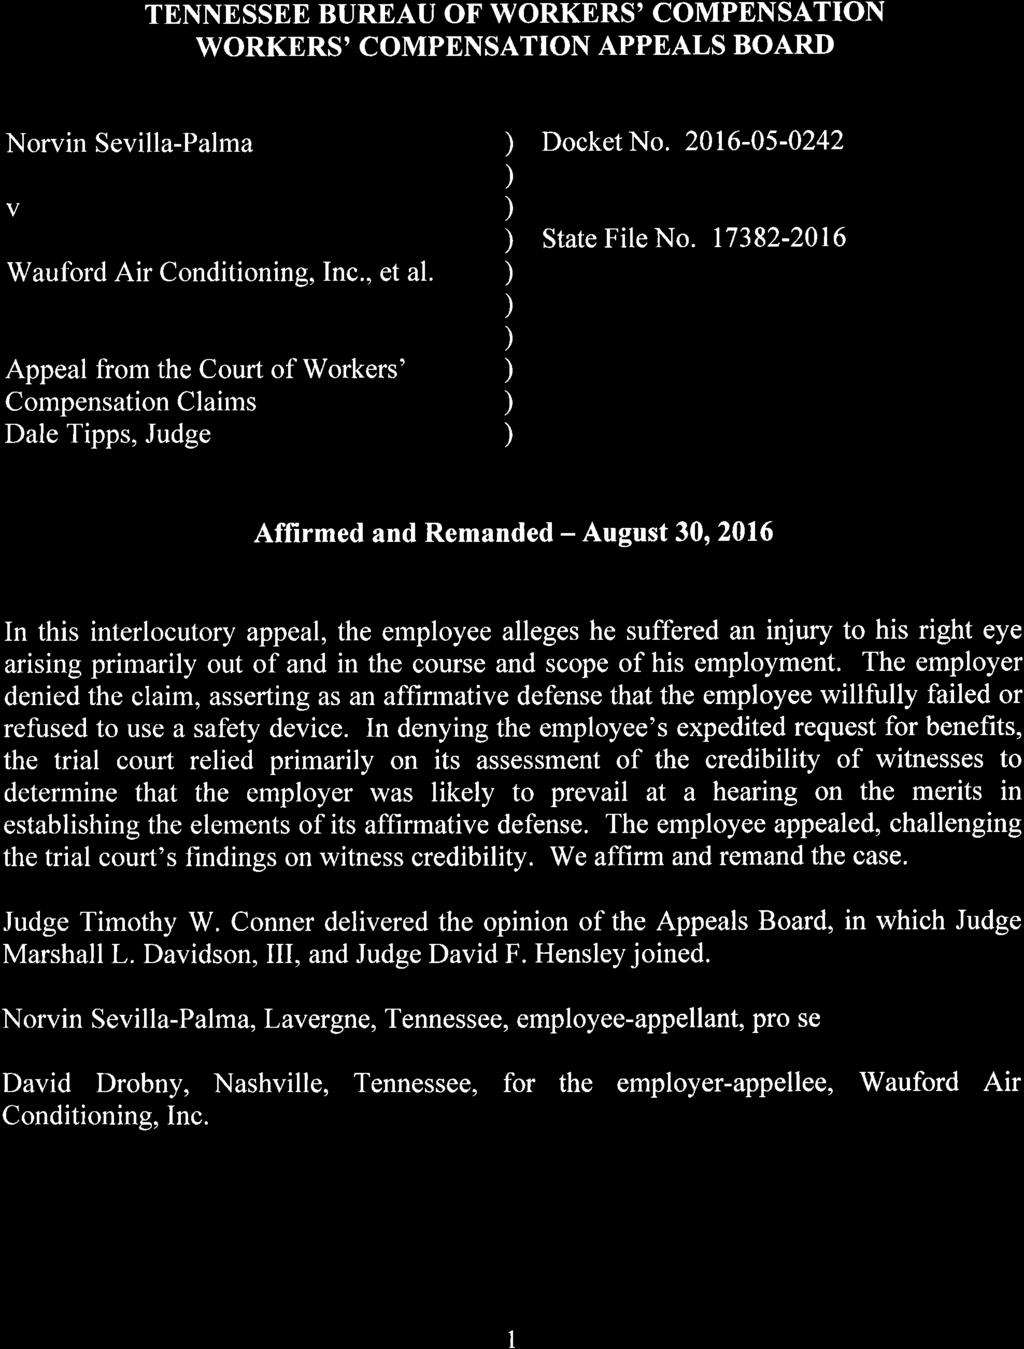 FILED August30,2016 TENNESSEE WORKERS' COMPENSATION APPEALS BOARD Time: 9:10 A.M. TENNESSEE BUREAU OF WORKERS' COMPENSATION WORKERS' COMPENSATION APPEALS BOARD Norvin Sevilla-Palma v.